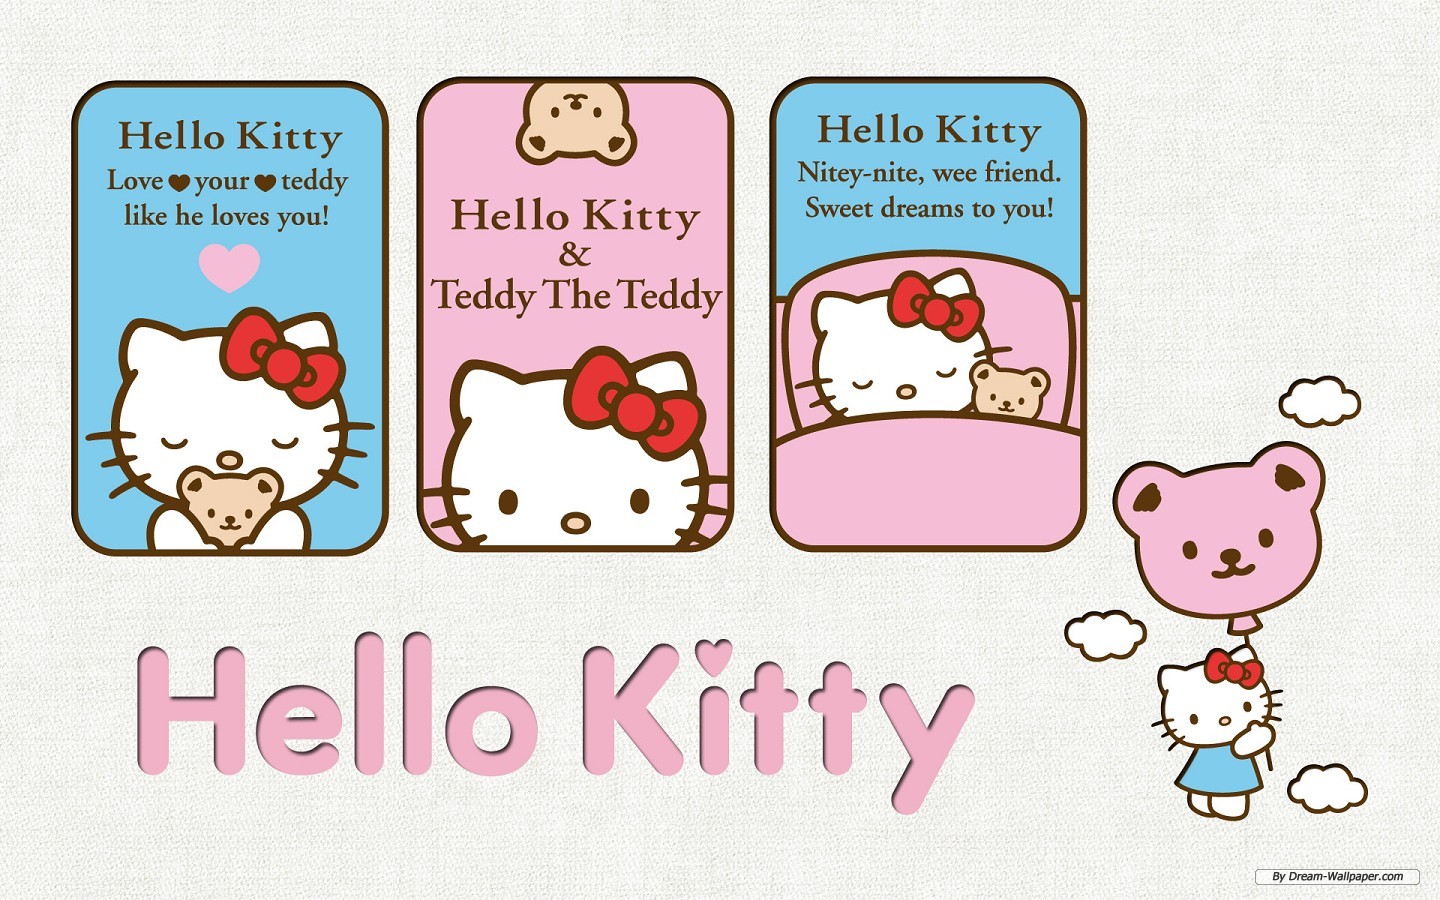 Free Wallpaper - Hello Kitty Wallpapers With Quotes - HD Wallpaper 